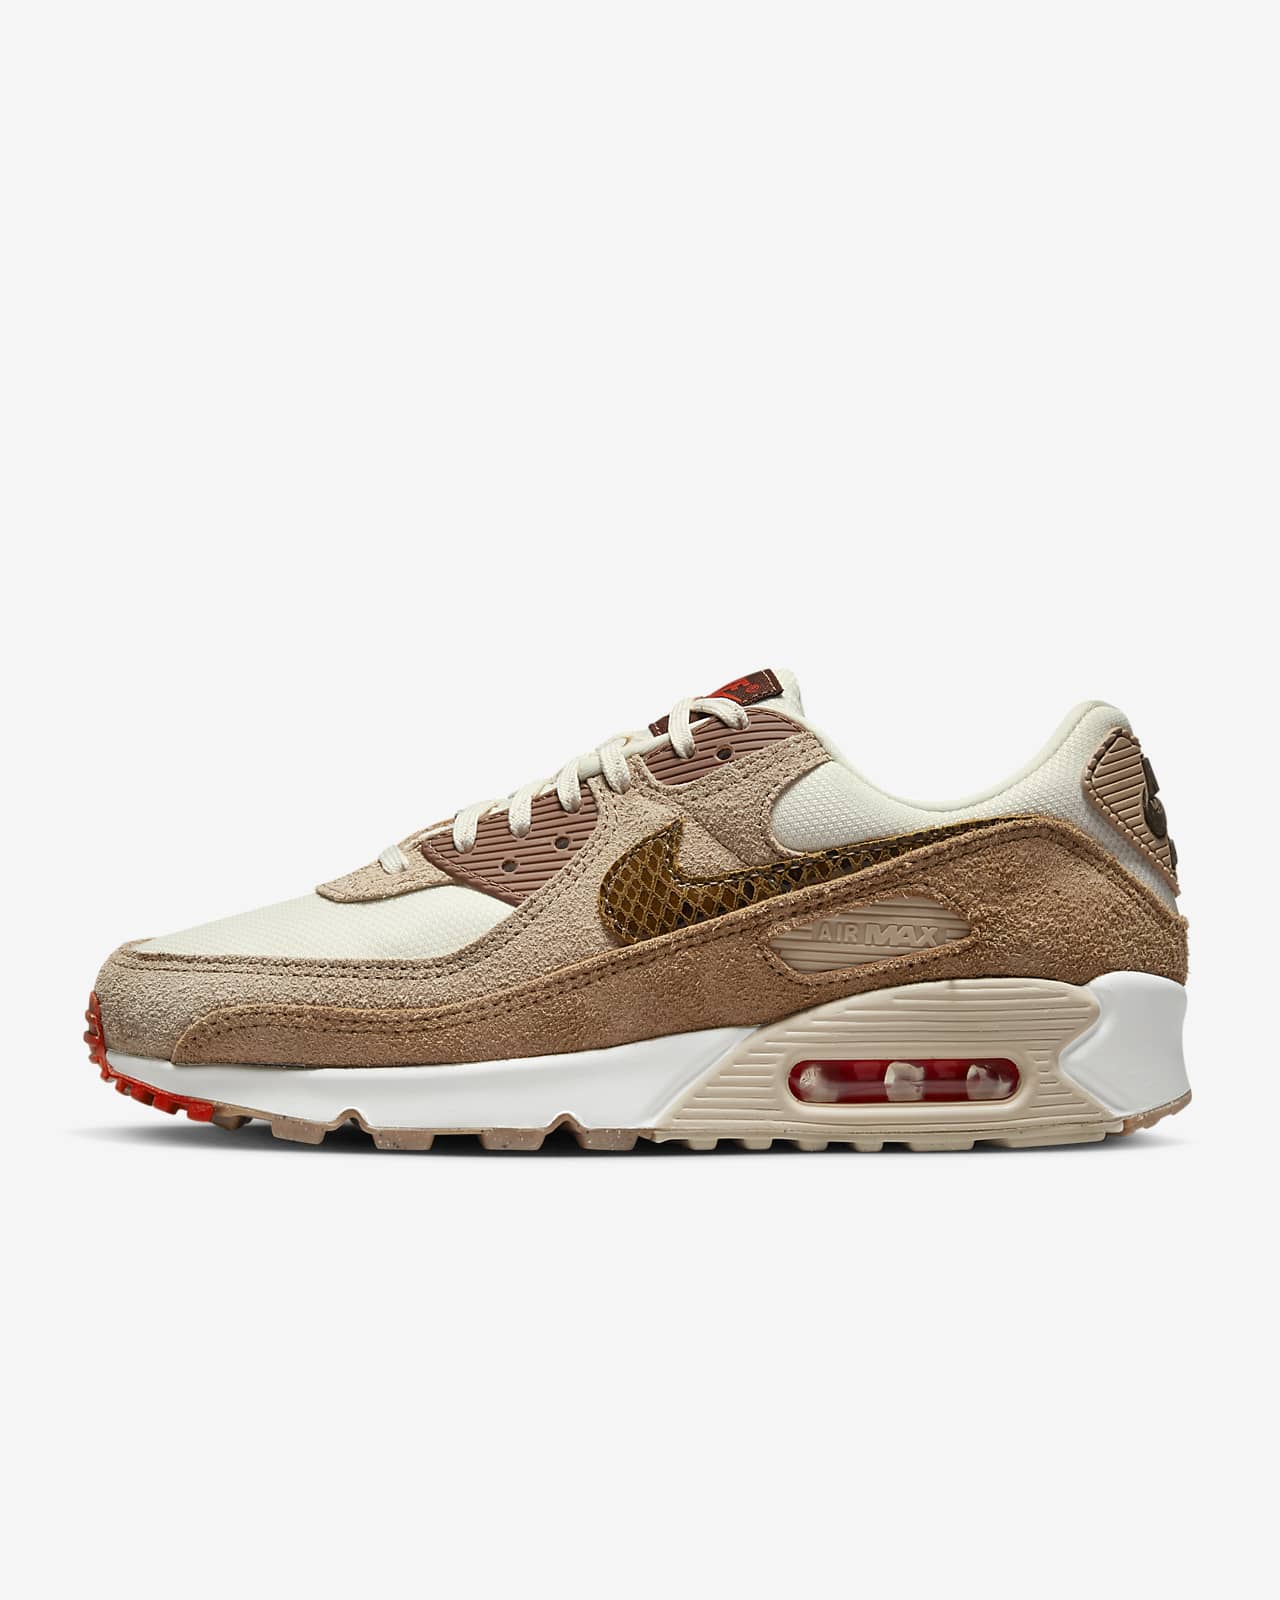 Recite number Assimilate Nike Air Max 90 AMD Women's Shoes. Nike.com